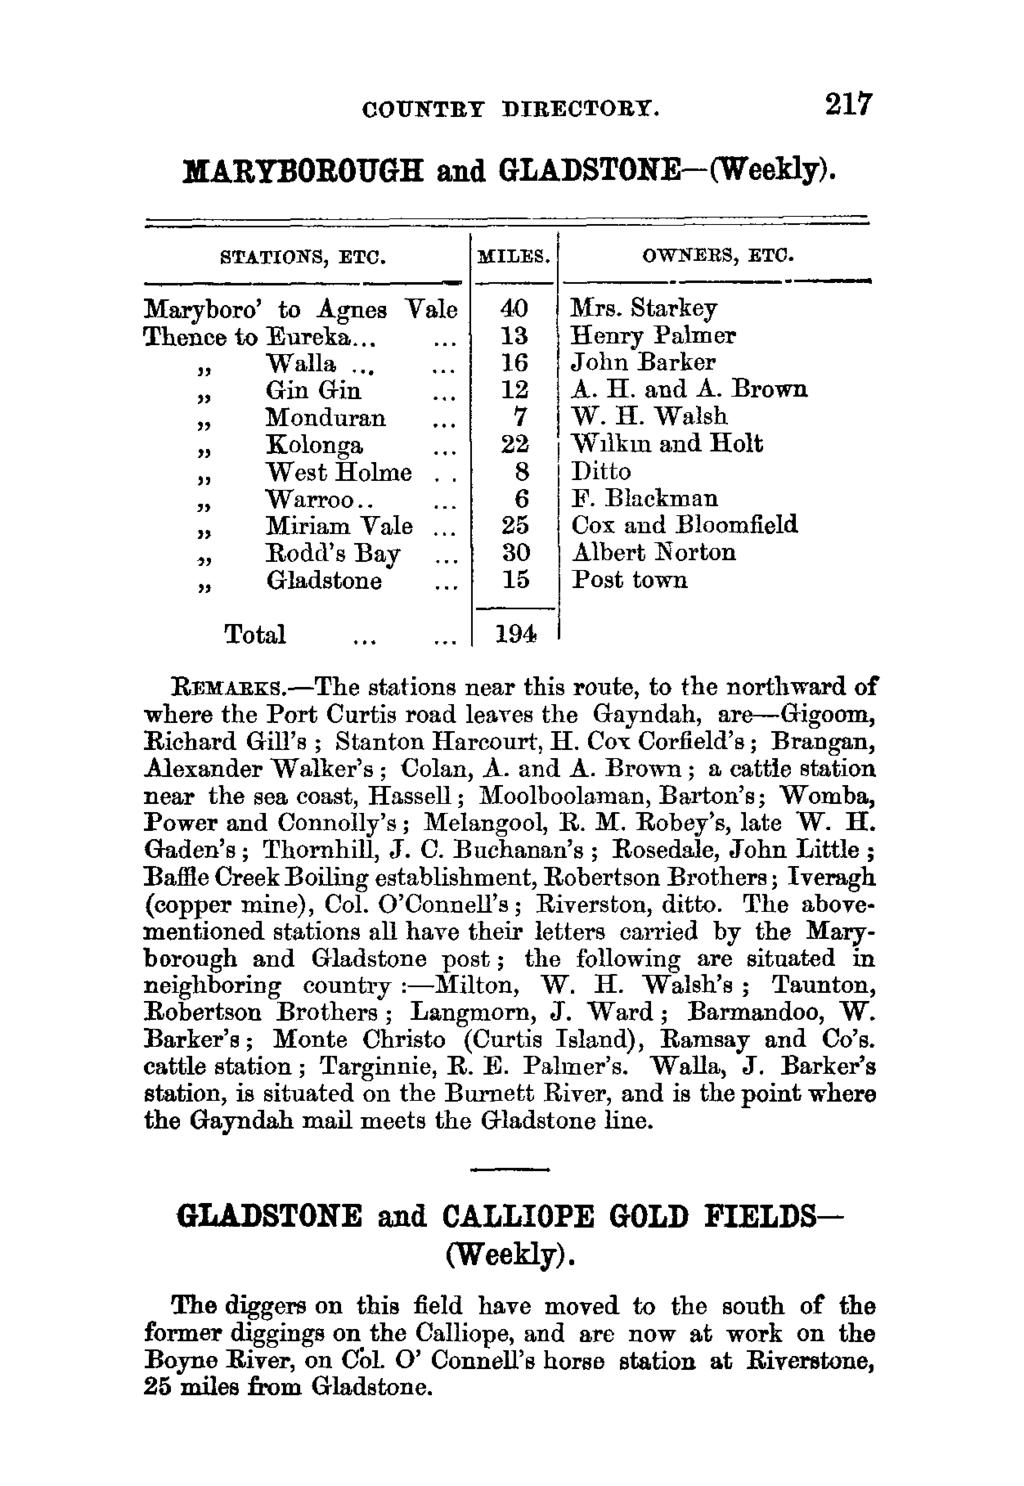 COUNTRY DIRECTORY. 217 MARYBOROUGH and GLADSTONE-( Weekly). STATIONS, ETC. MILES. OWNERS, ETC. Maryboro' to Agnes Vale 40 Mrs. Starkey Thence to Eureka...... 13 Henry Palmer Walla.